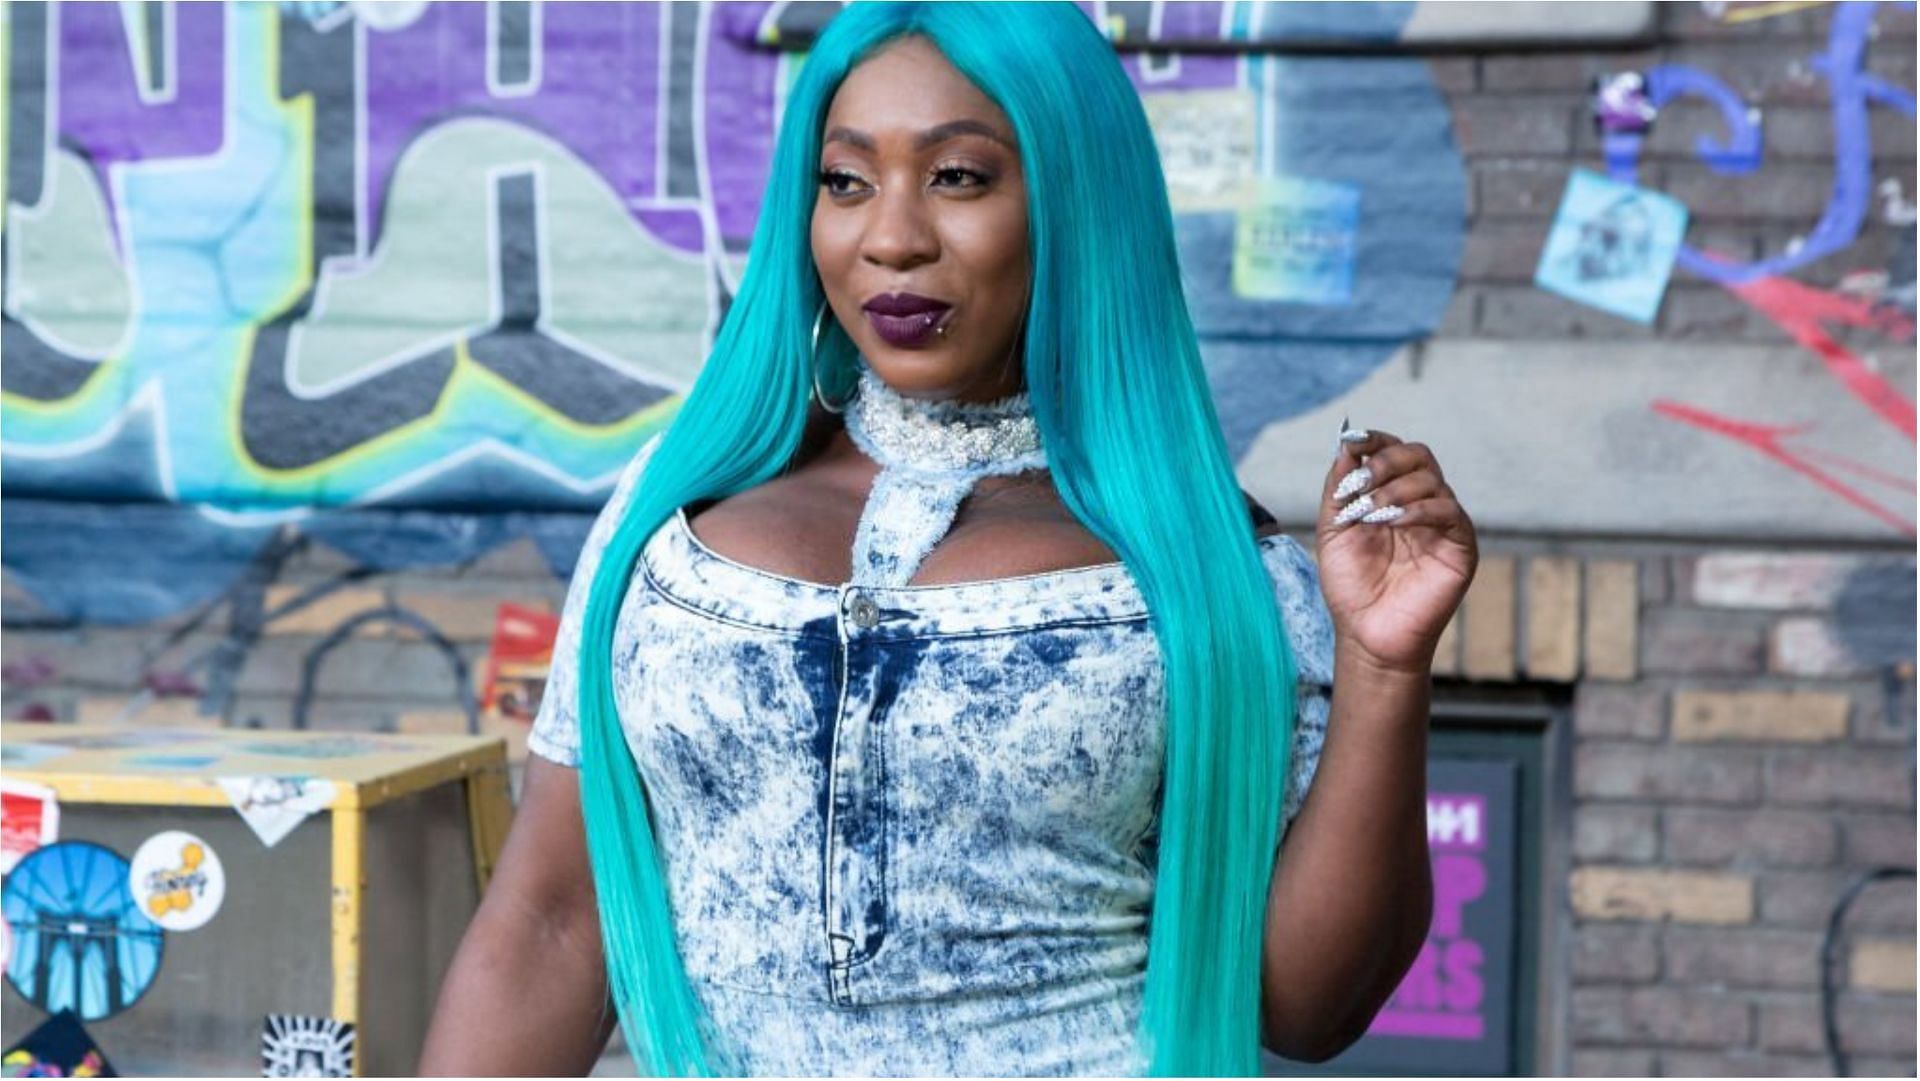 What happened to Spice? Coma claim debunked amid fears over Dancehall